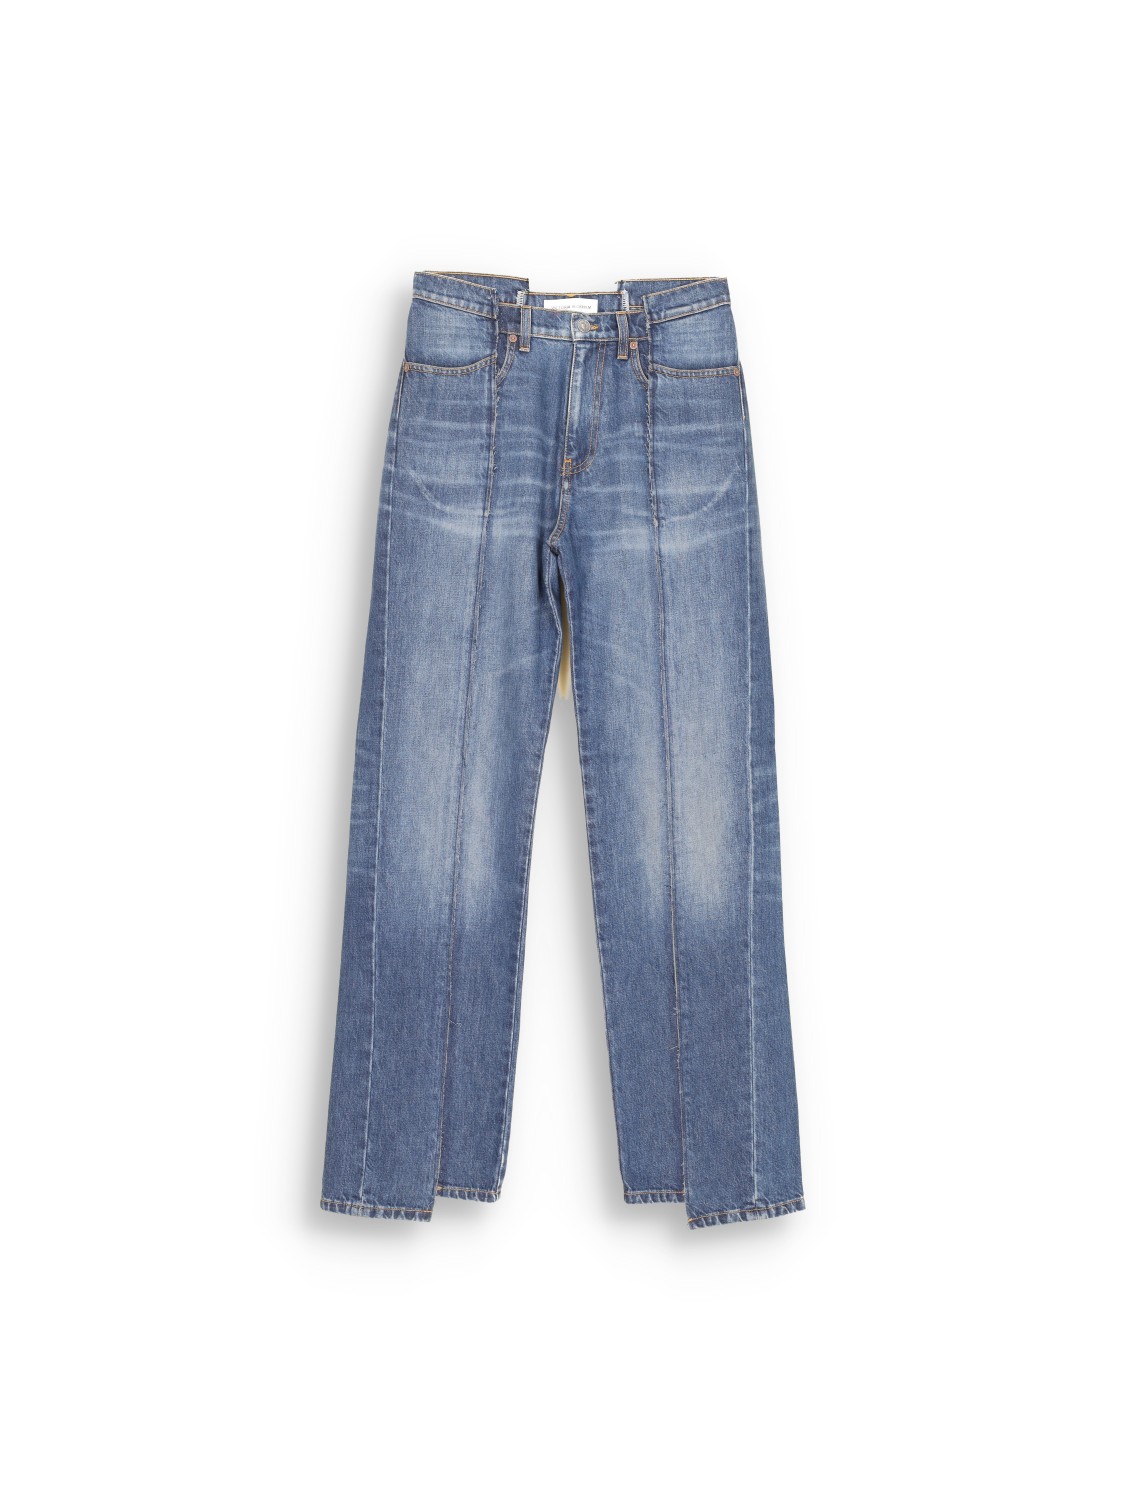 Jeans pants with dark wash